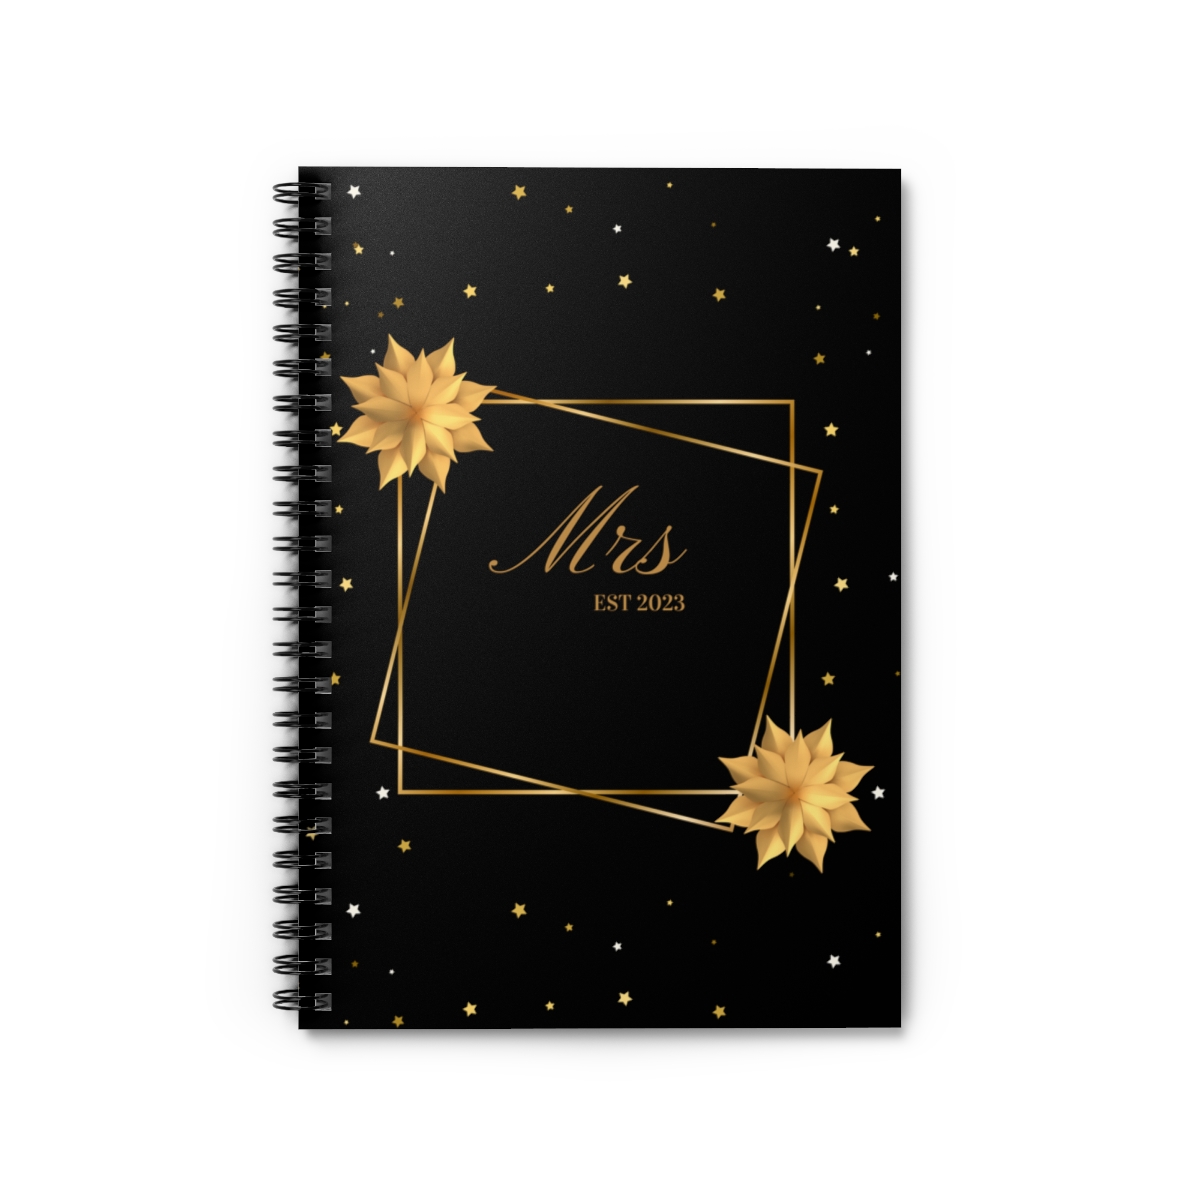 New Beginnings Spiral Notebook (Black Cover) product thumbnail image